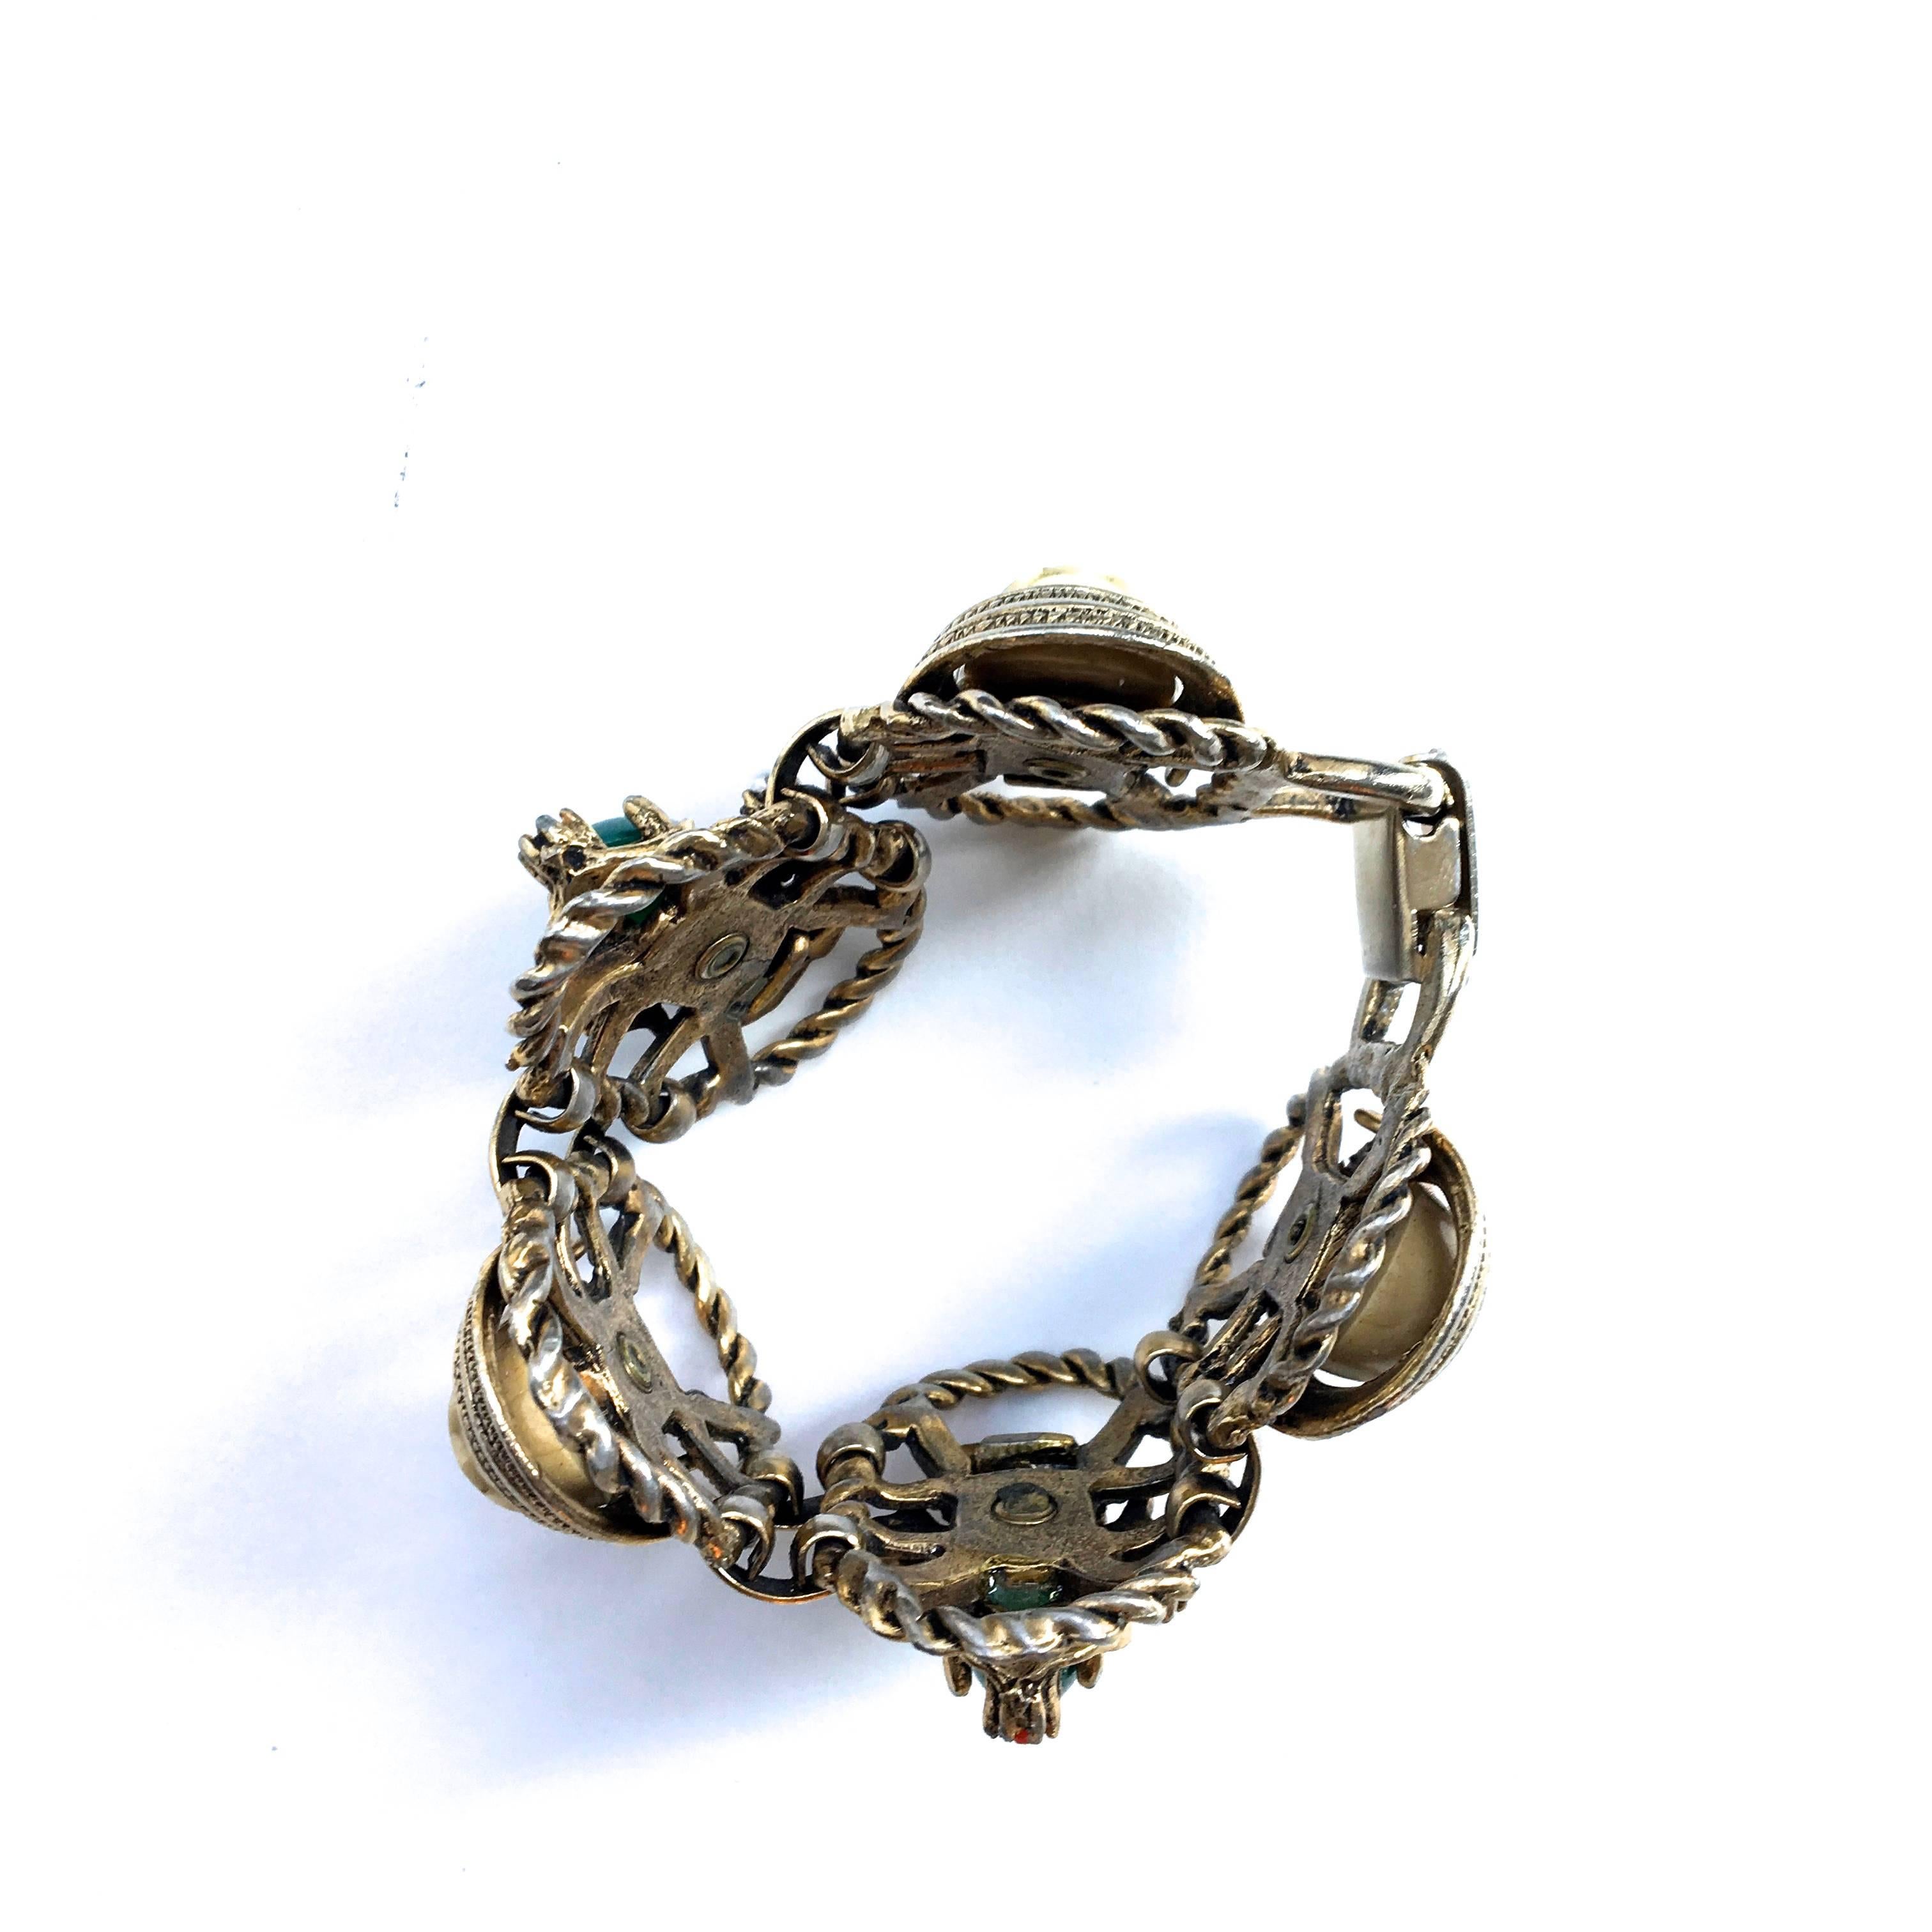 Presented here is a beautiful asian princess bracelet. This beautiful bracelet is comprised of a silver tone metal bracelet frame. Within the links of the bracelet, there are asian princess heads with small pearls adorning the head mask. There are